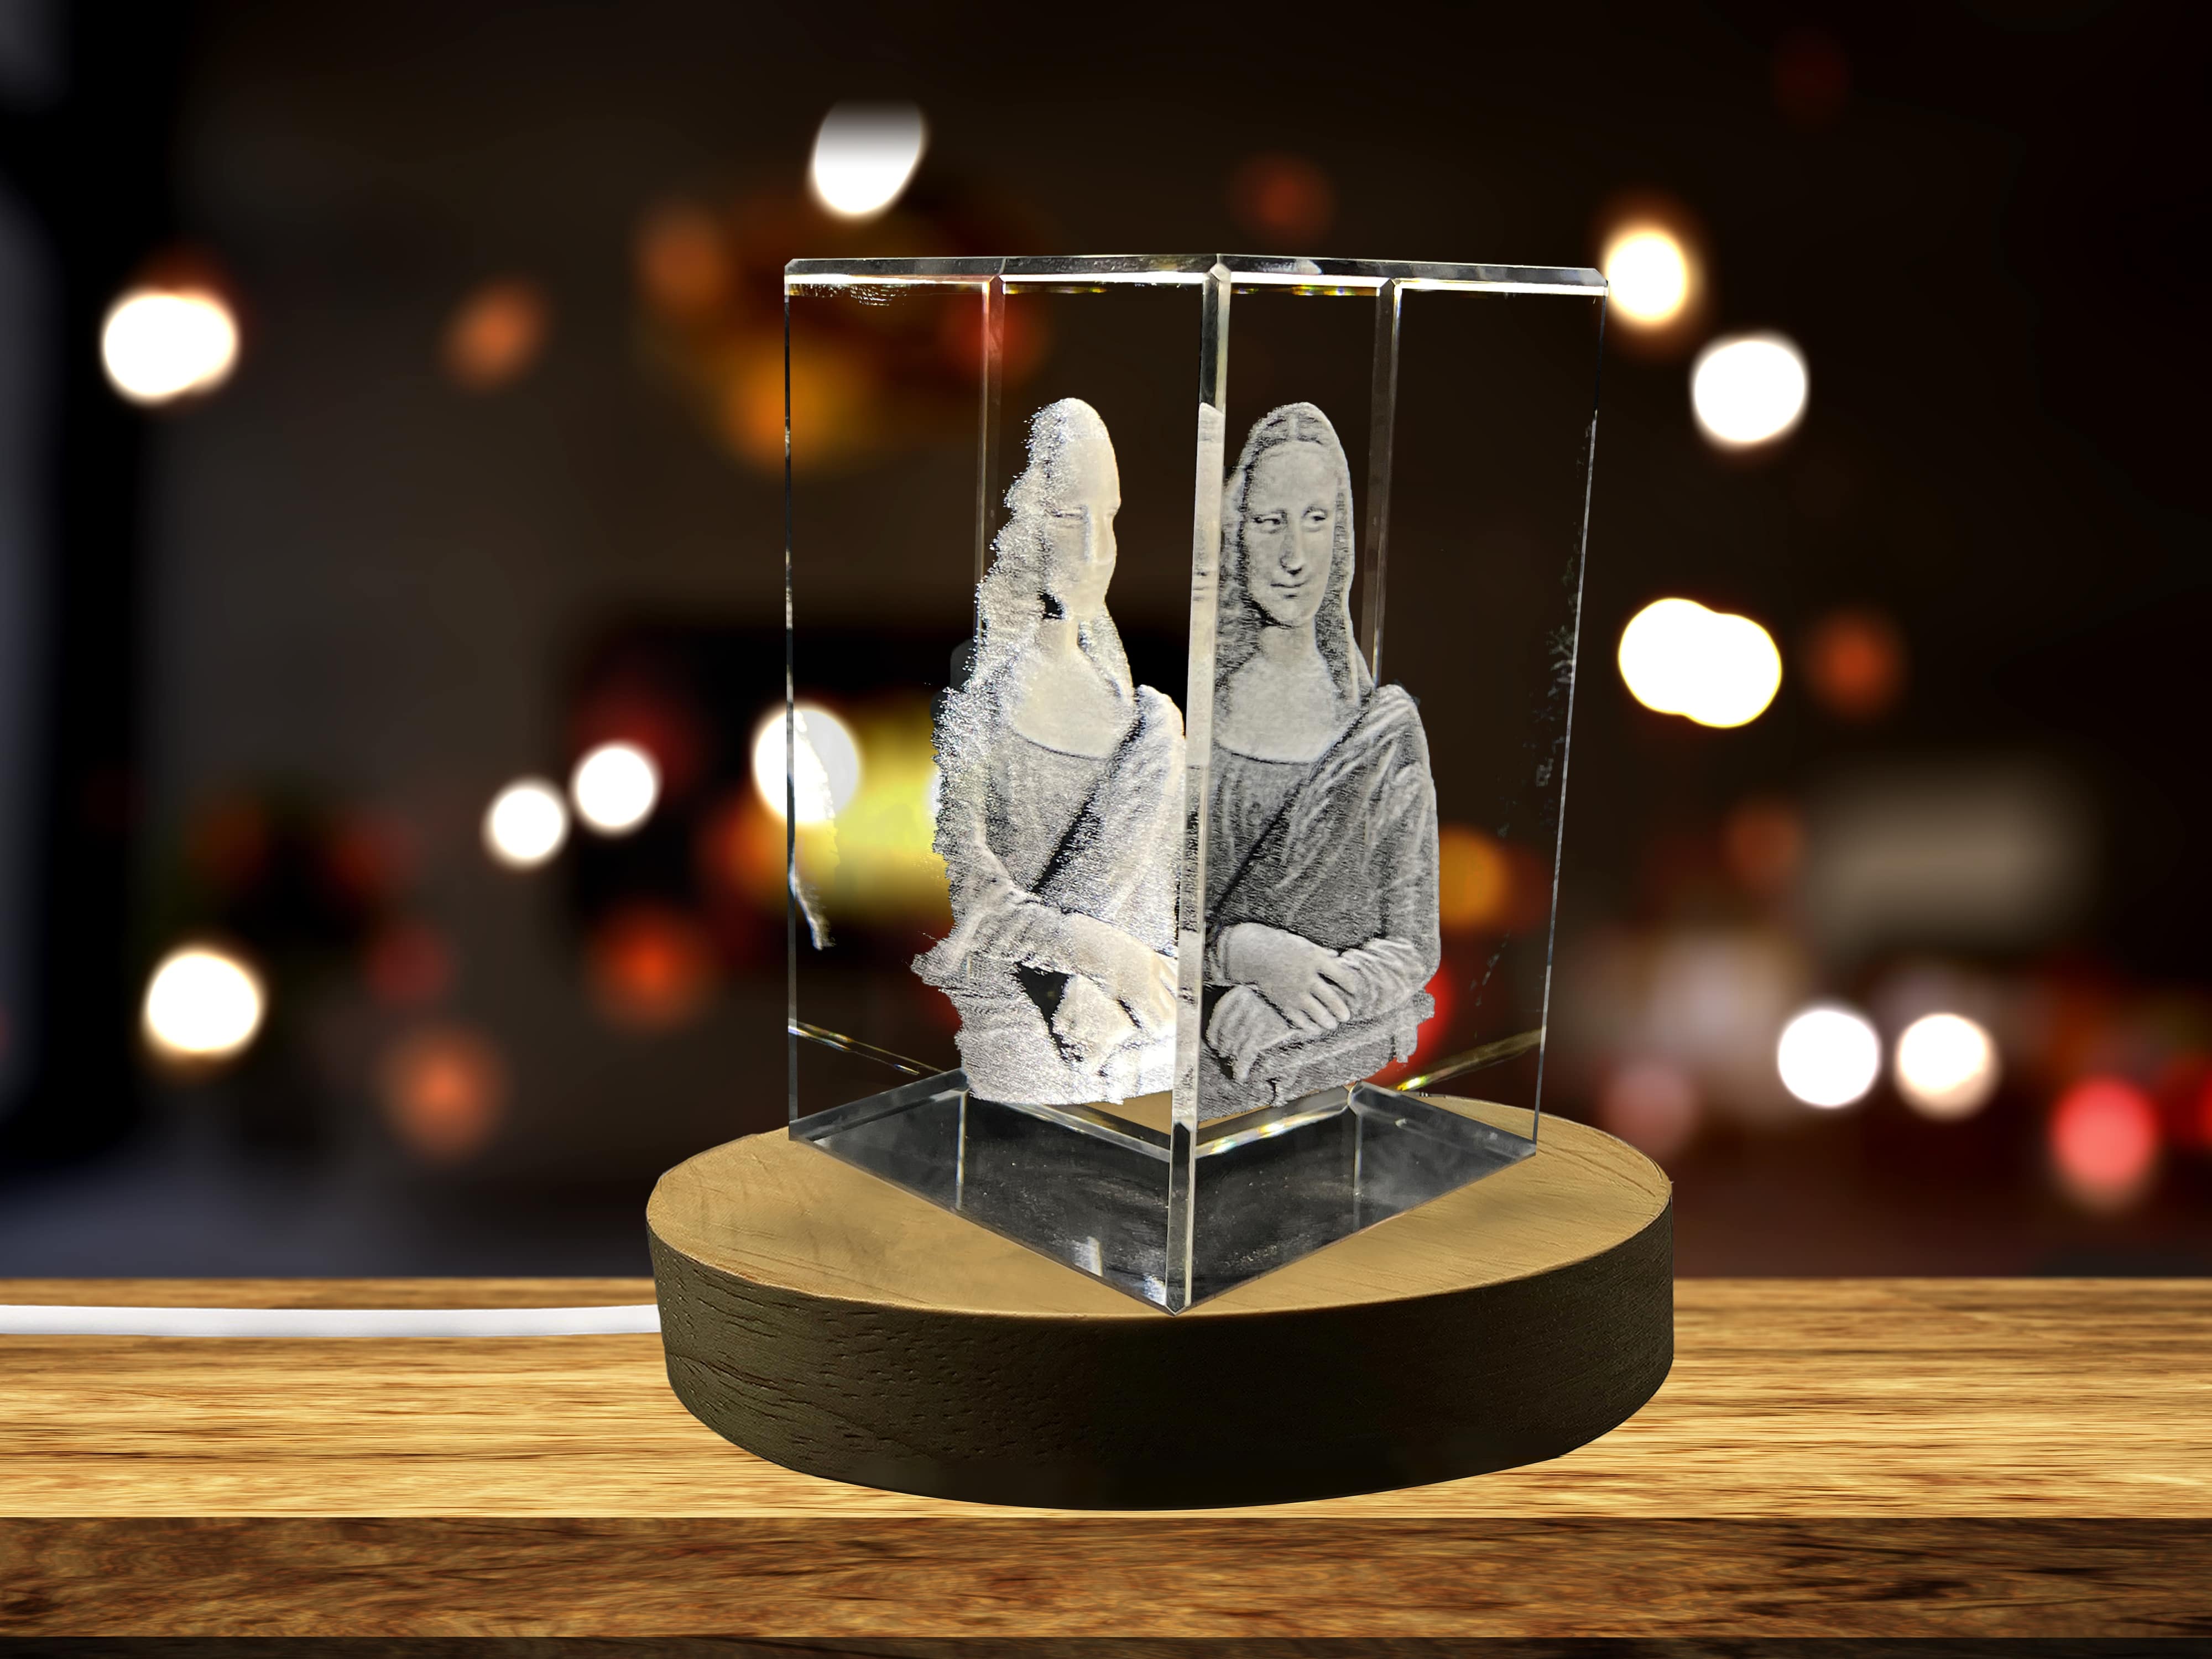 Mona Lisa 3D Engraved Crystal Decor with LED Base - Made in Canada - Gift Box Included A&B Crystal Collection